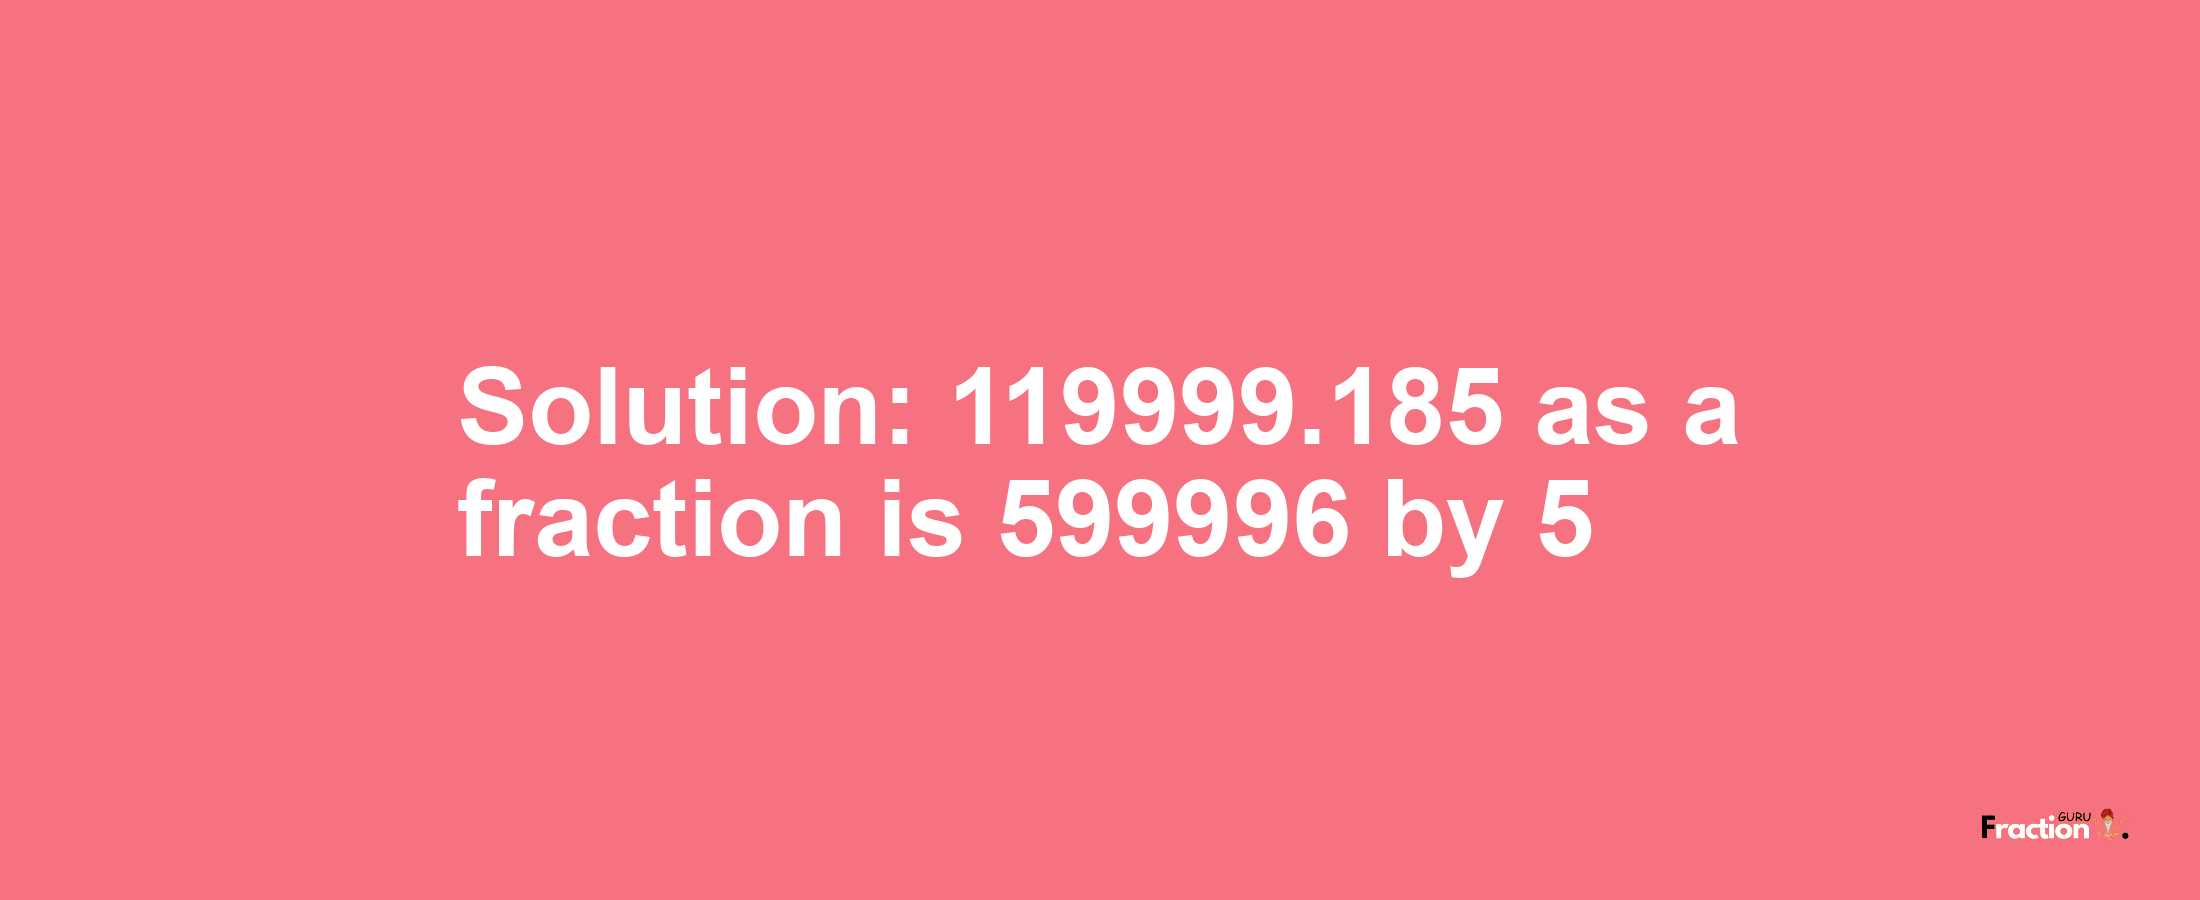 Solution:119999.185 as a fraction is 599996/5